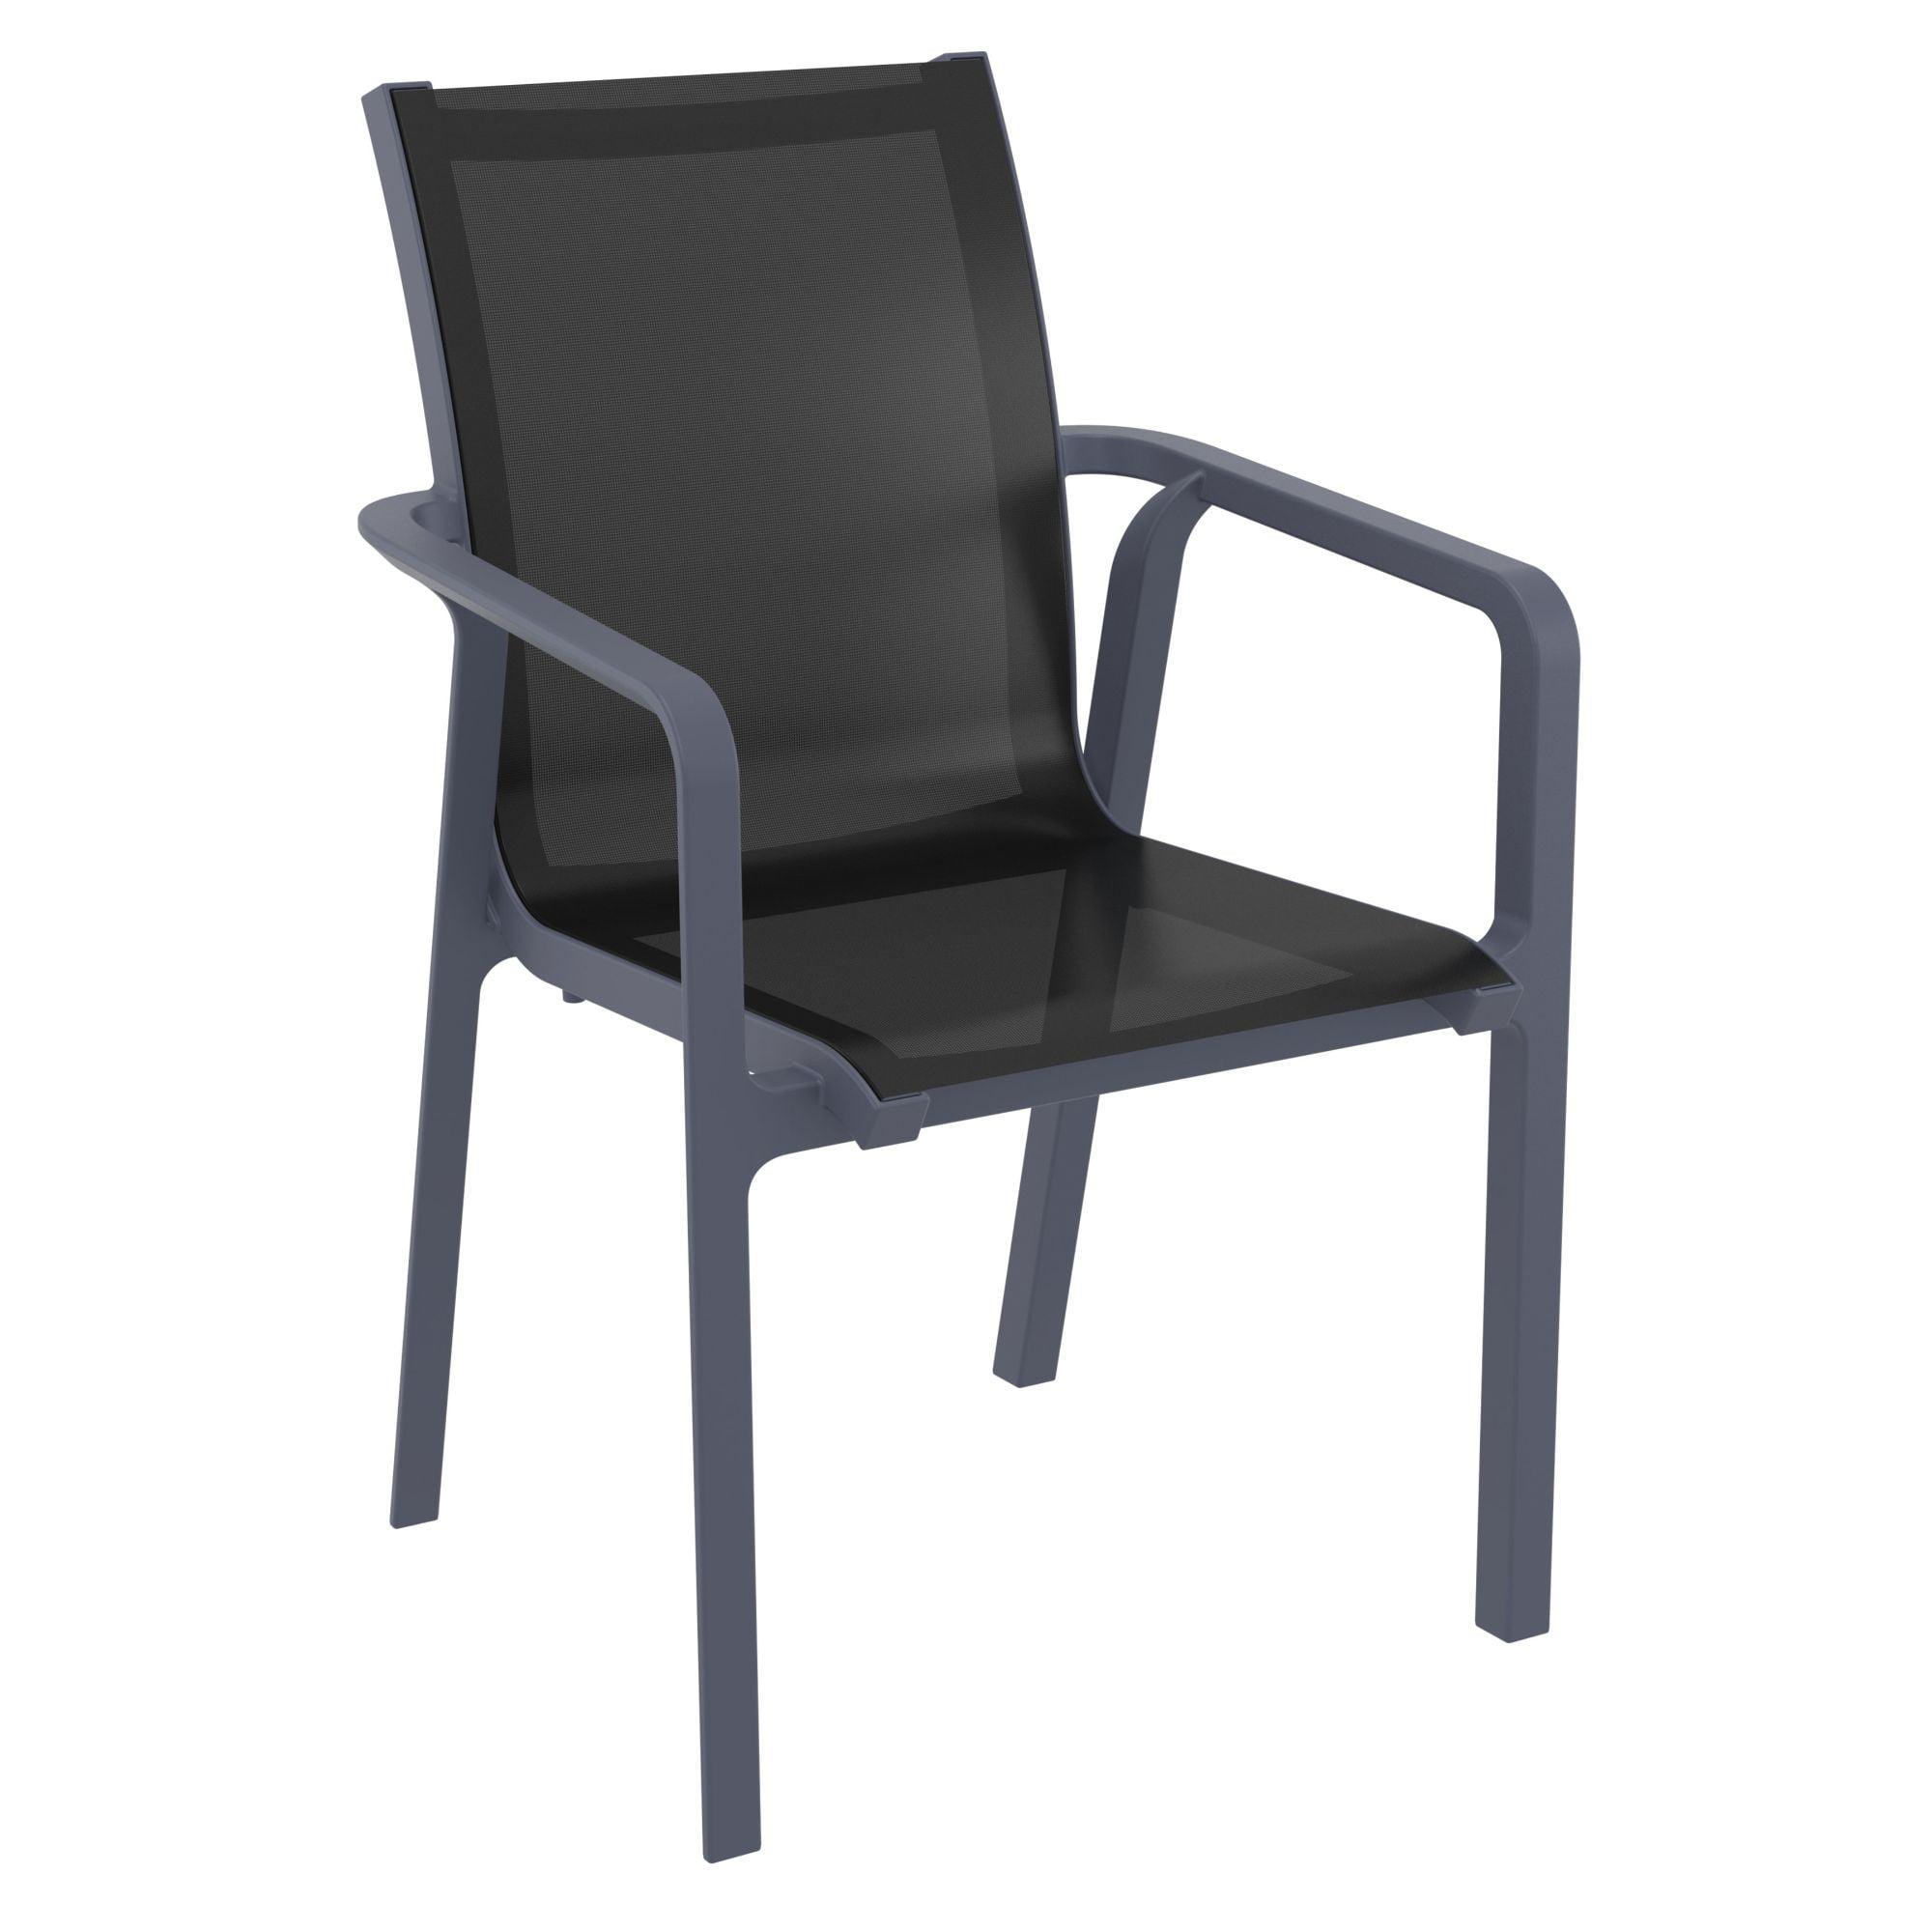 35.5" Gray and Black Resin Sling Outdoor Dining Arm Chair